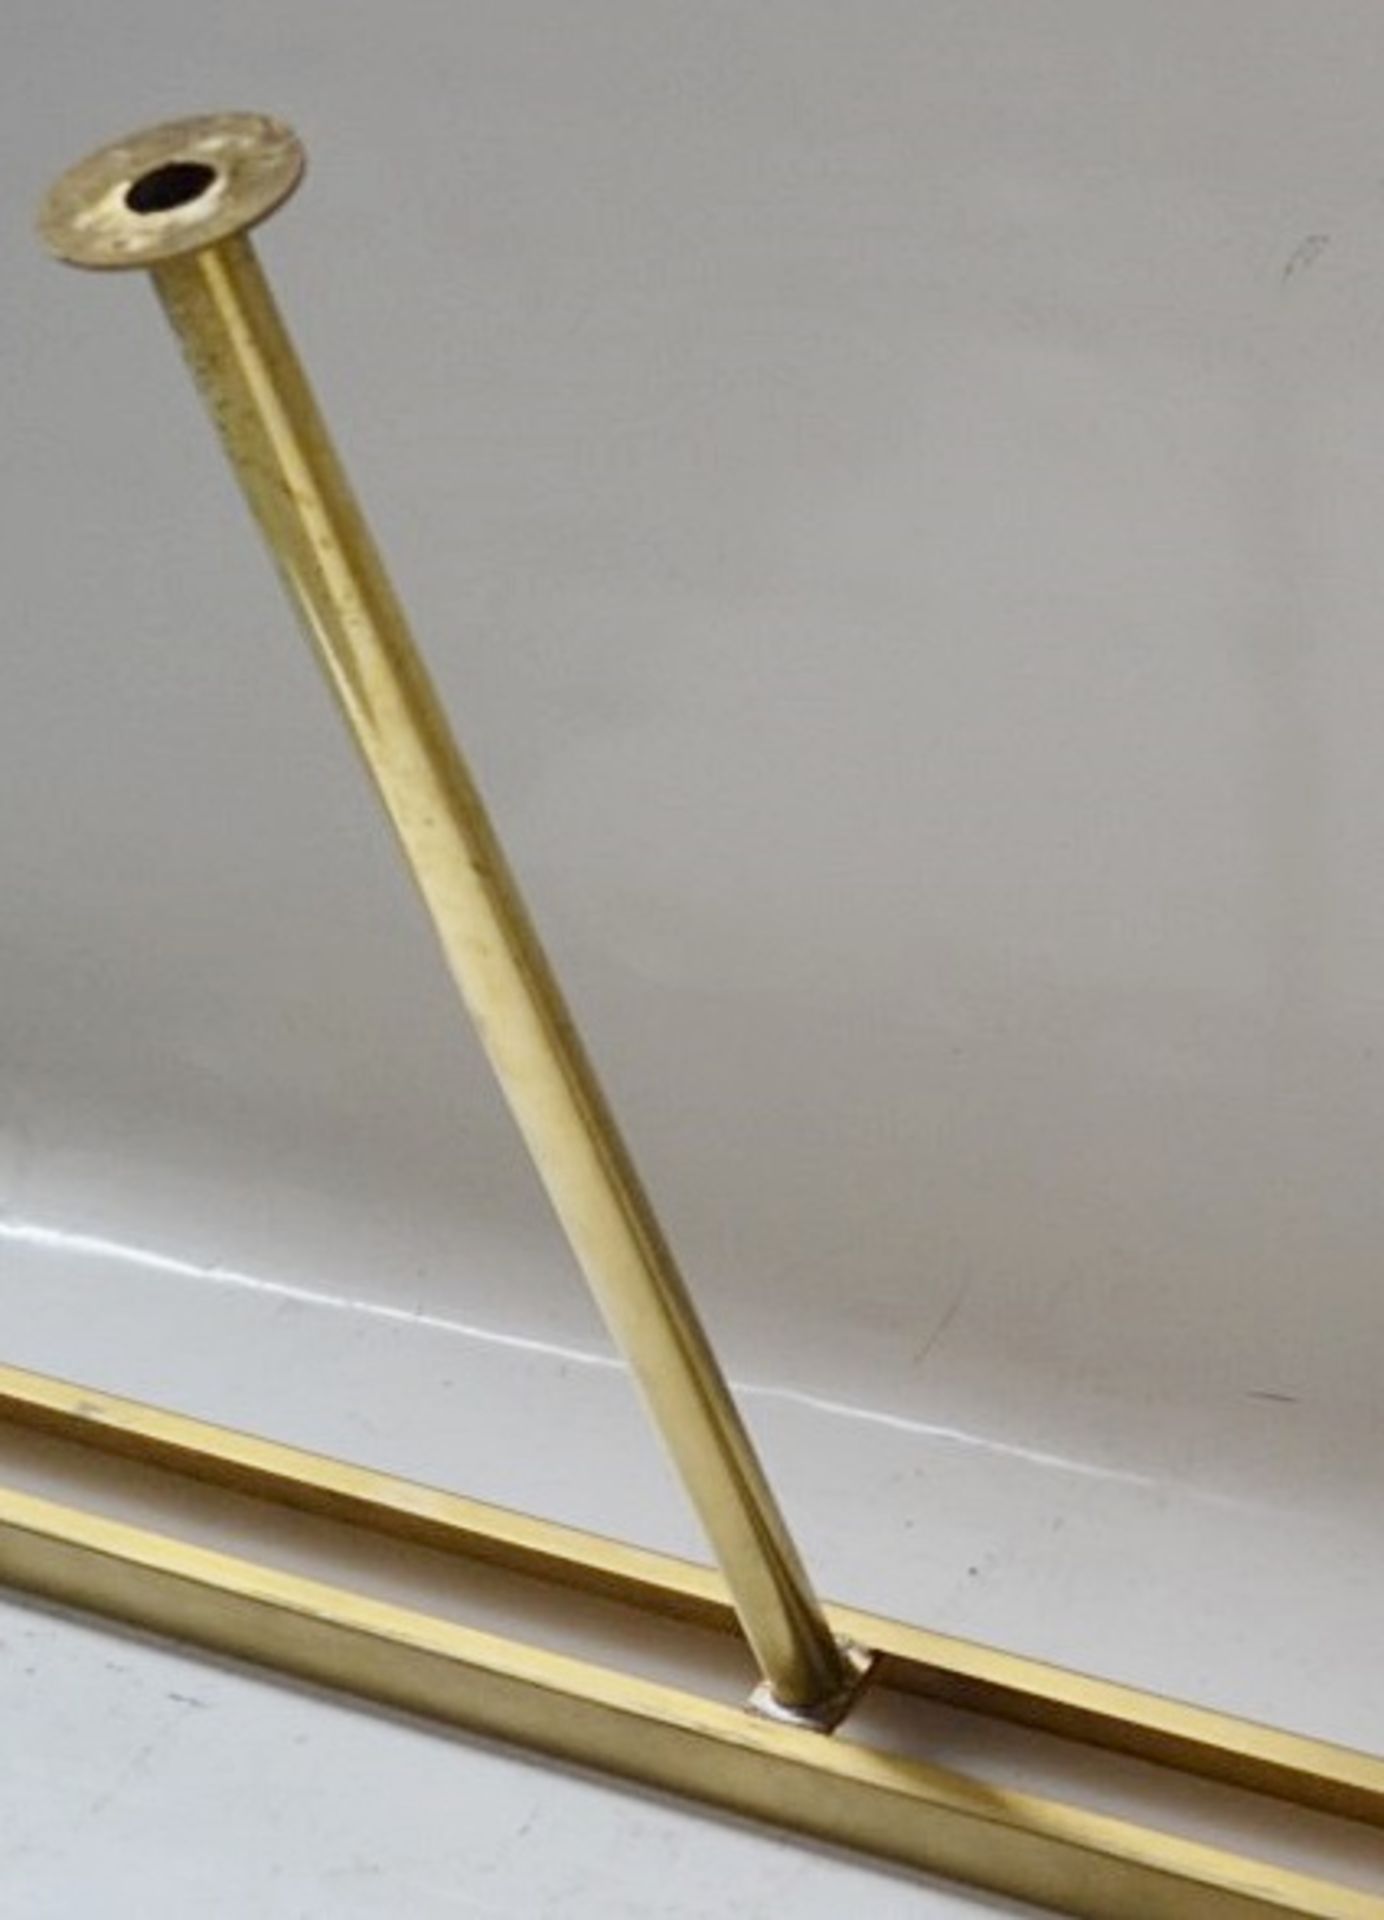 1 x Bespoke Table Mounted LED Restaurant Bar LIght In Brass With Acrylic Diffusers - 3 Metres Wide - Image 8 of 8